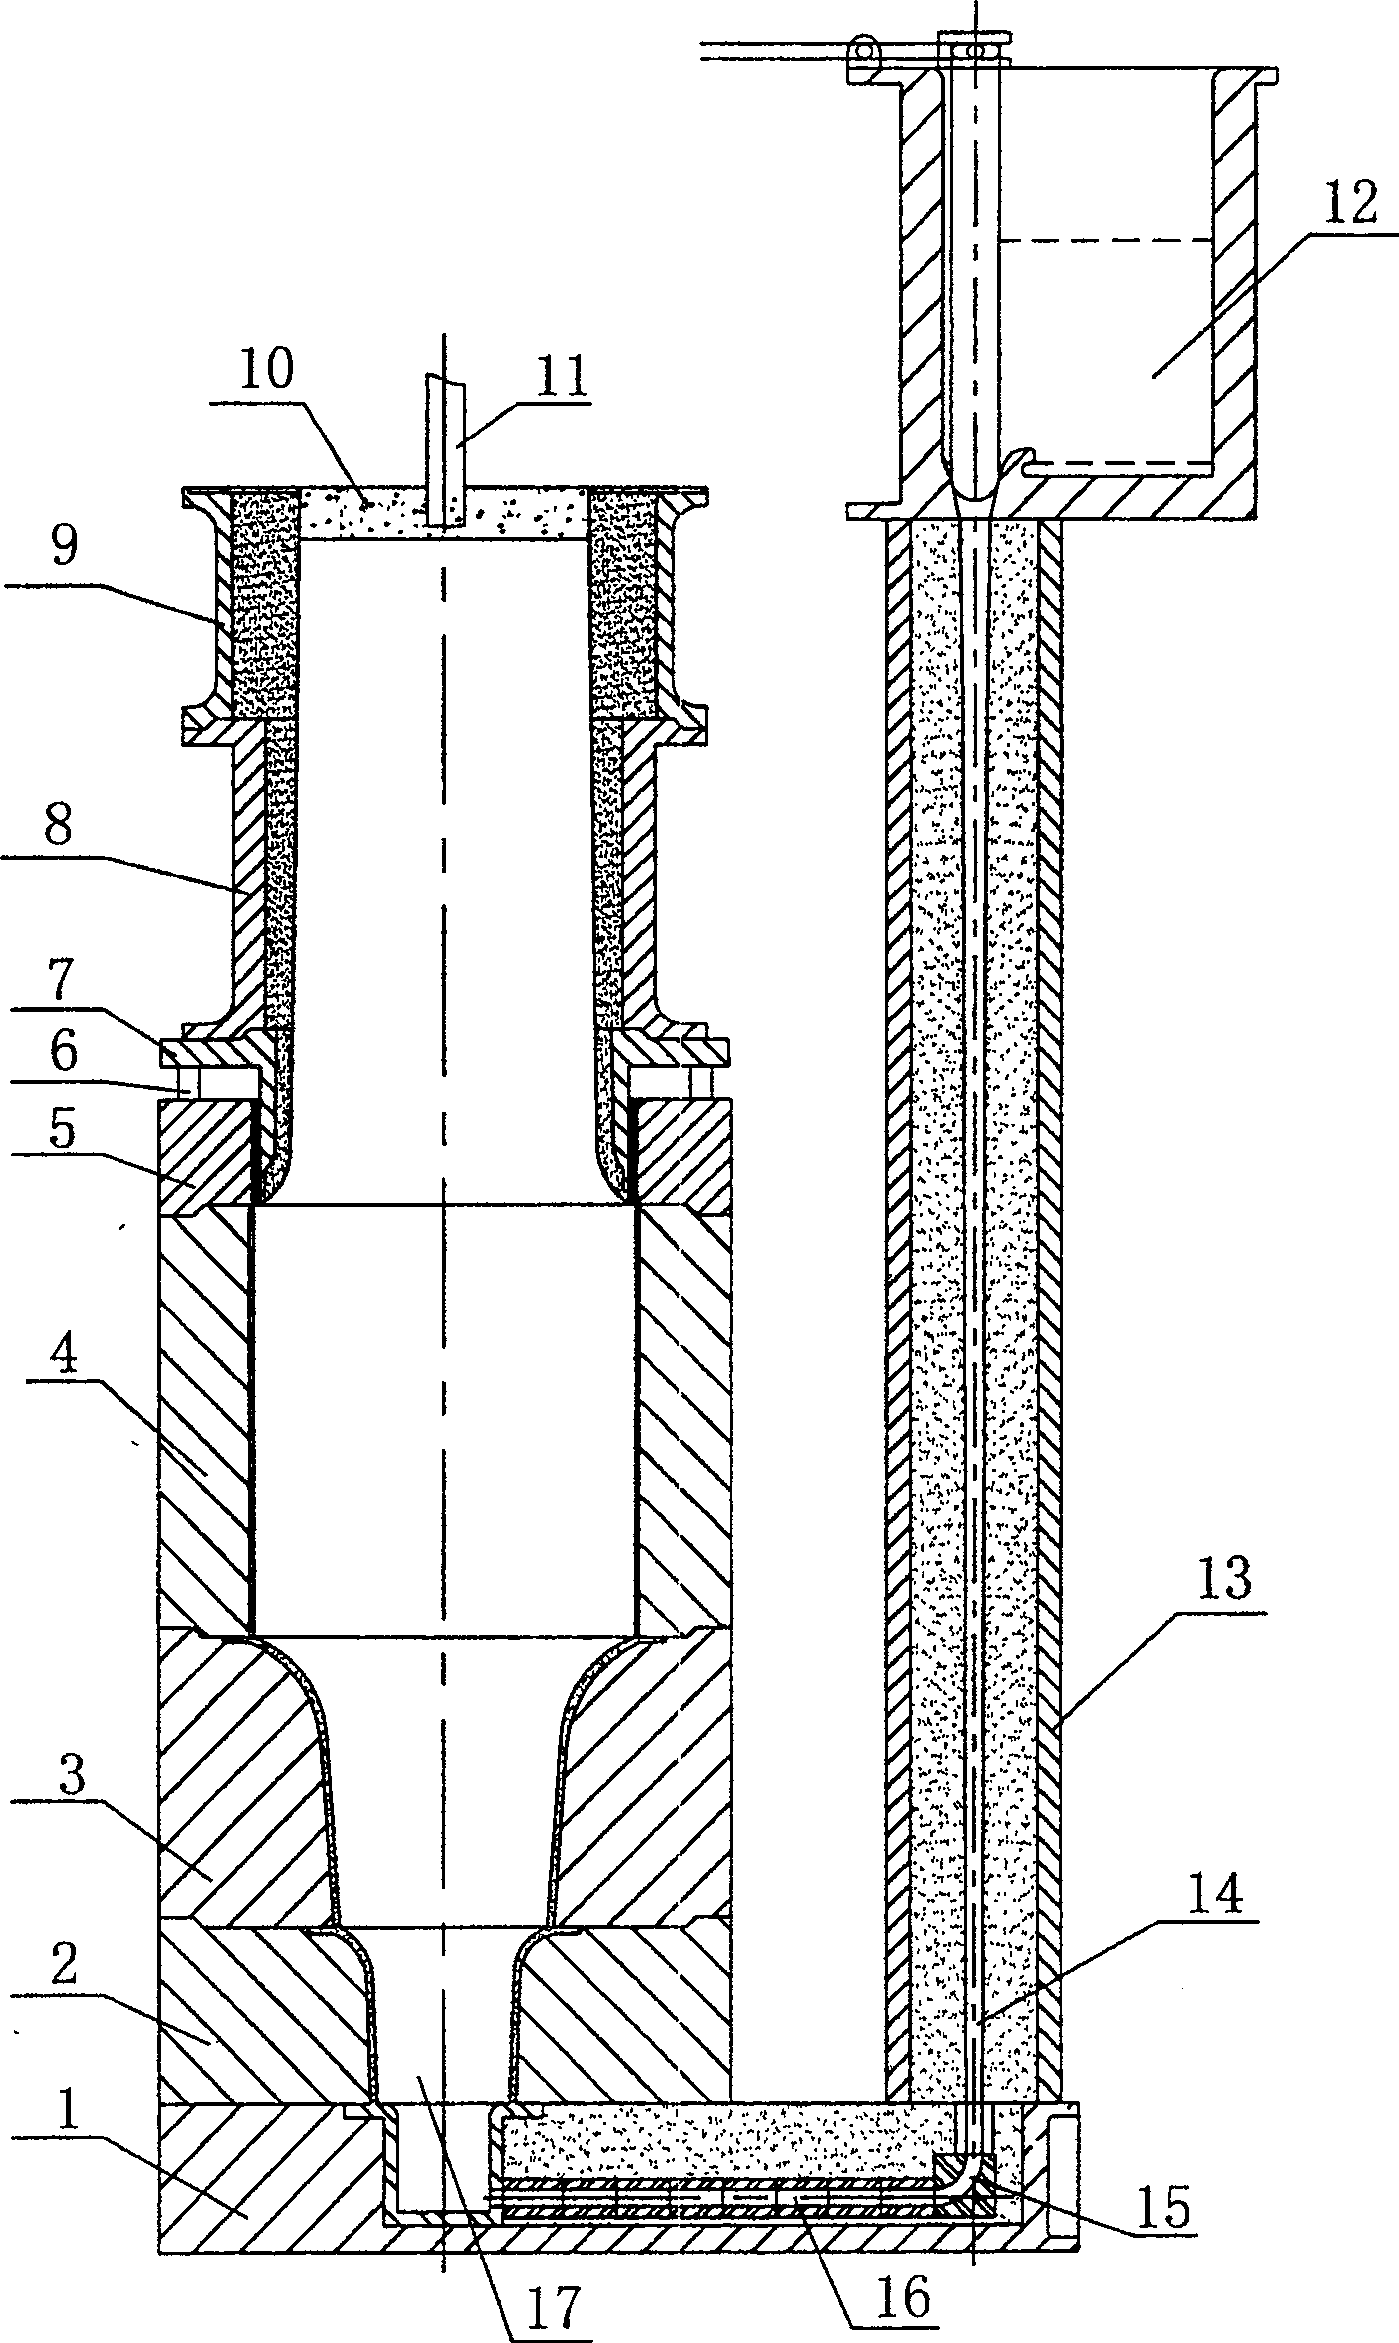 Process for preparing large cast steel support roller